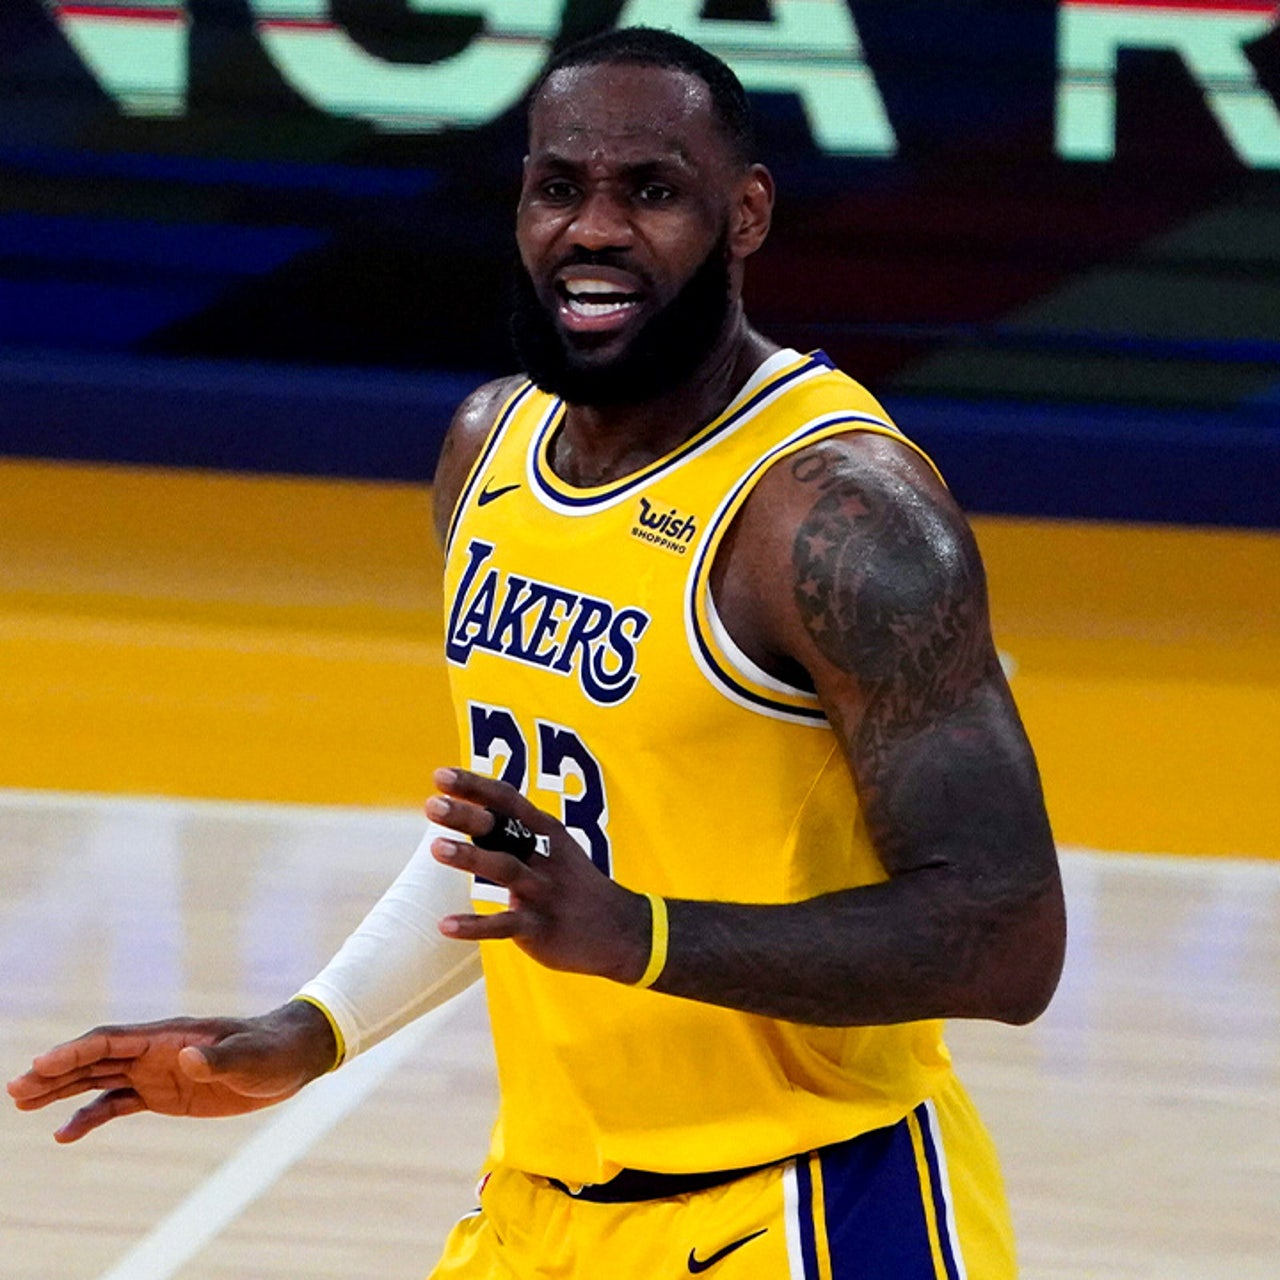 LeBron James becomes the third NBA player to reach 35,000 career points